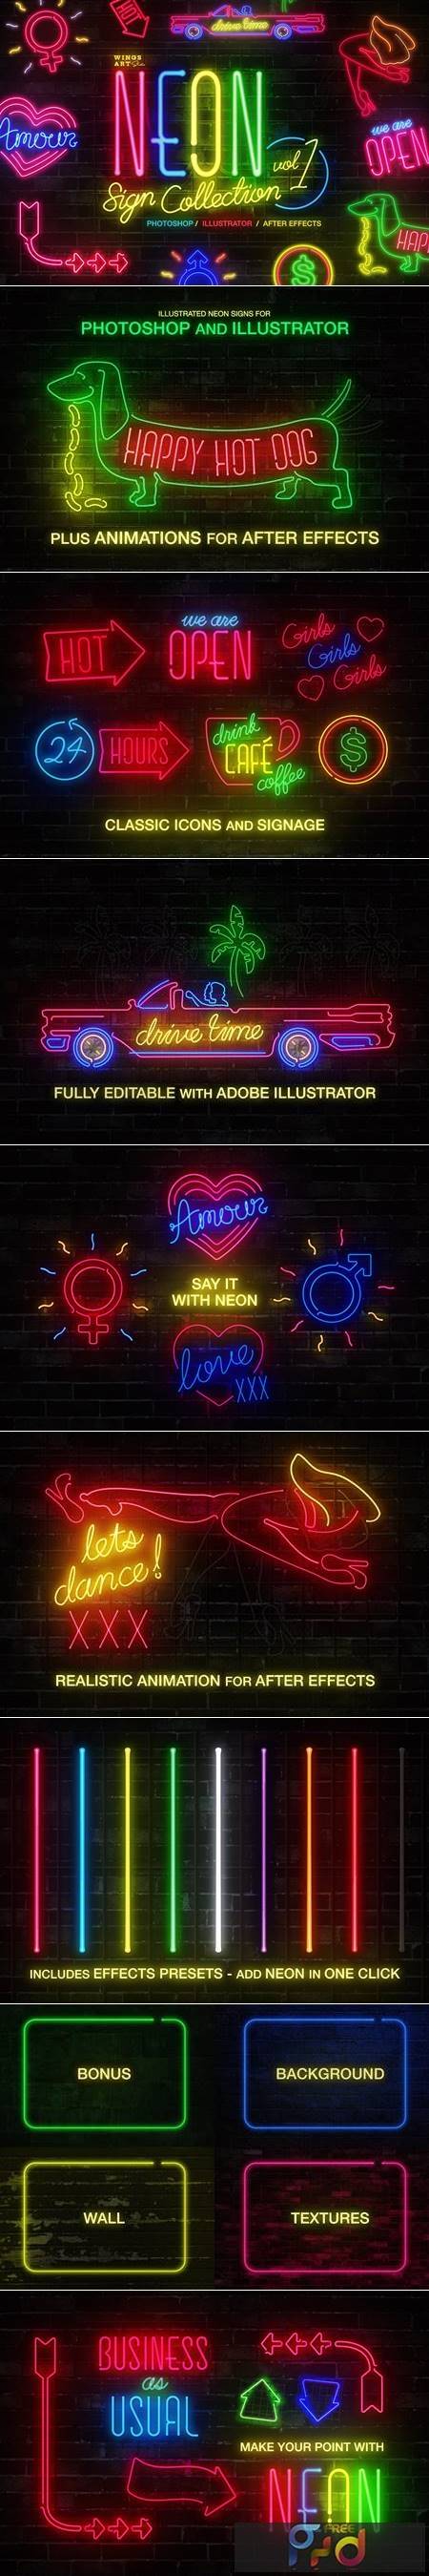 Neon Sign Collection- Volume One 4718662 1